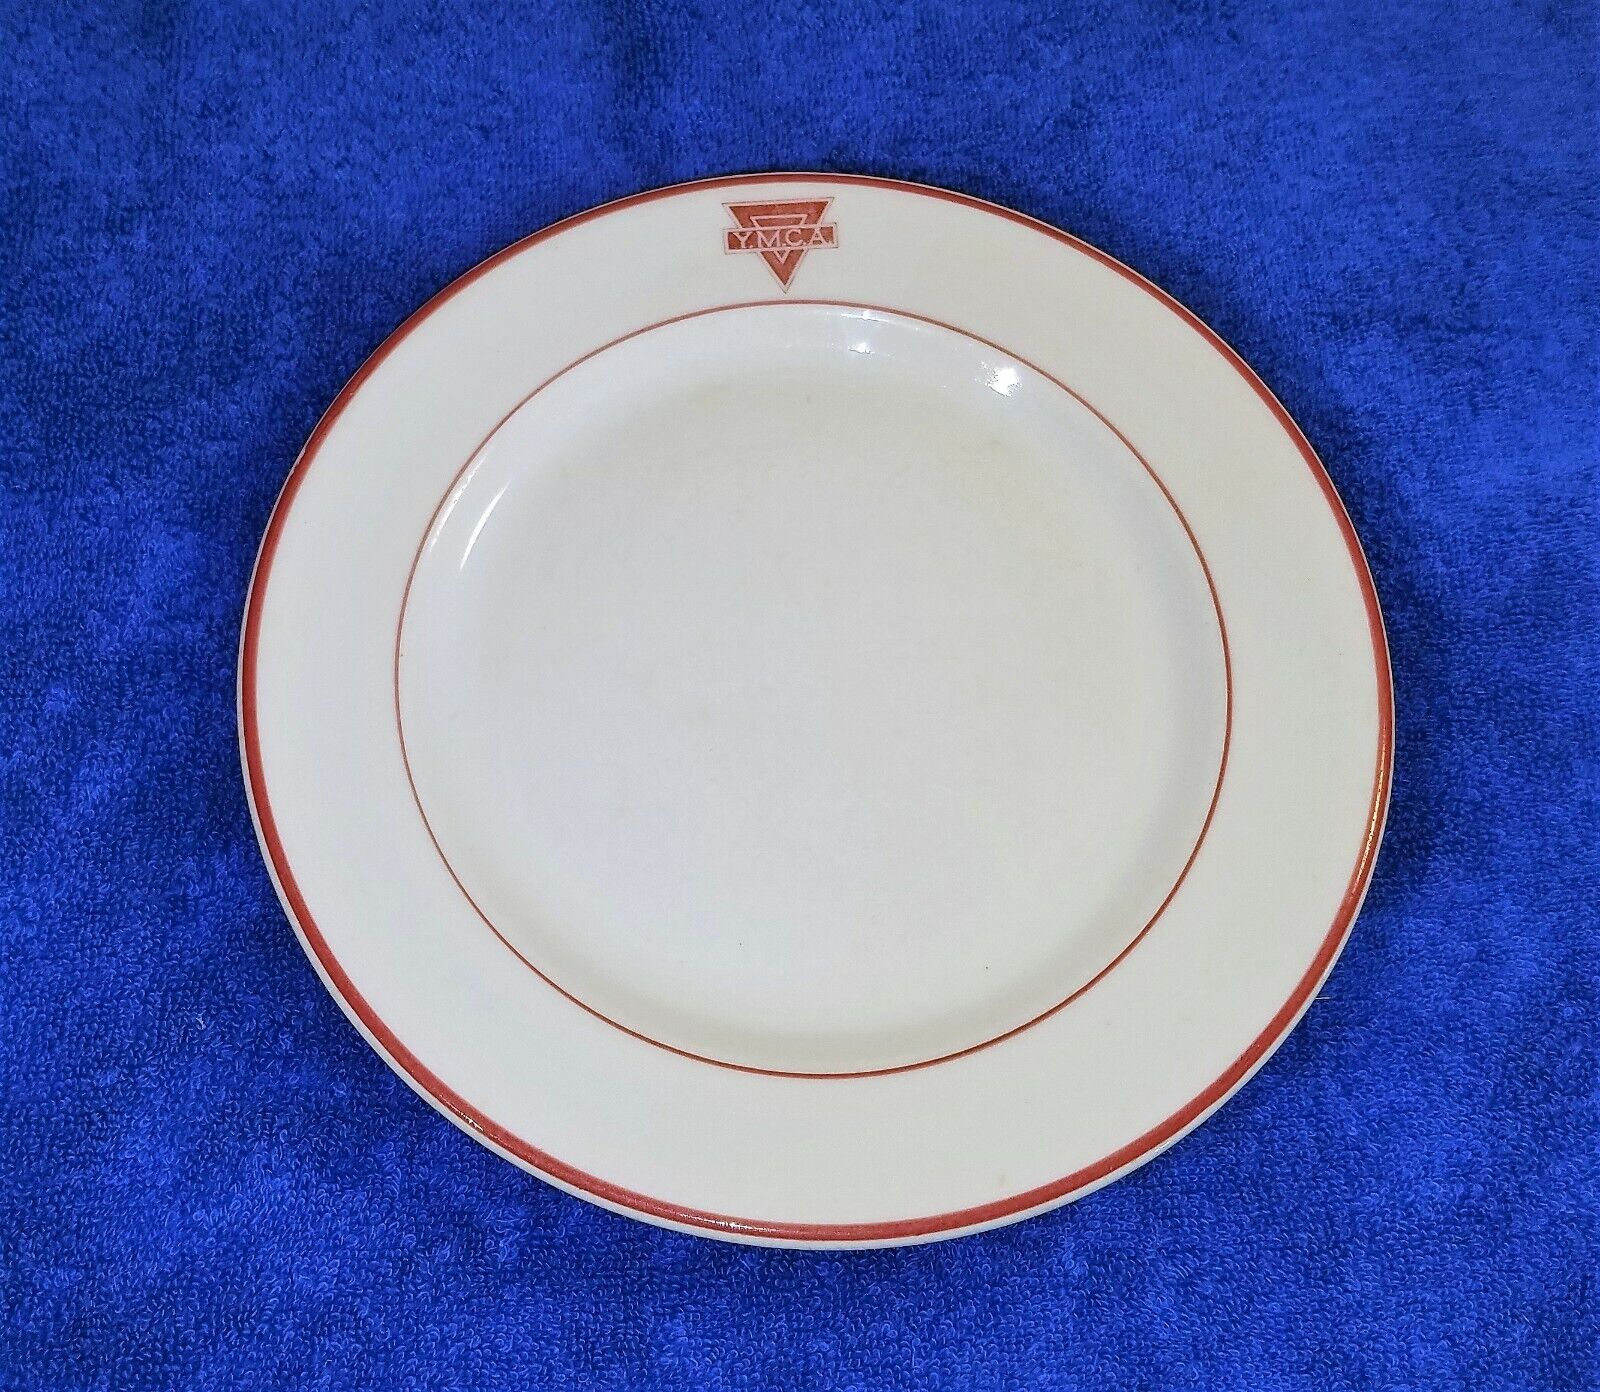 Vintage Ymca 9" Dinner Plate - Sterling Verified China 1940-50s